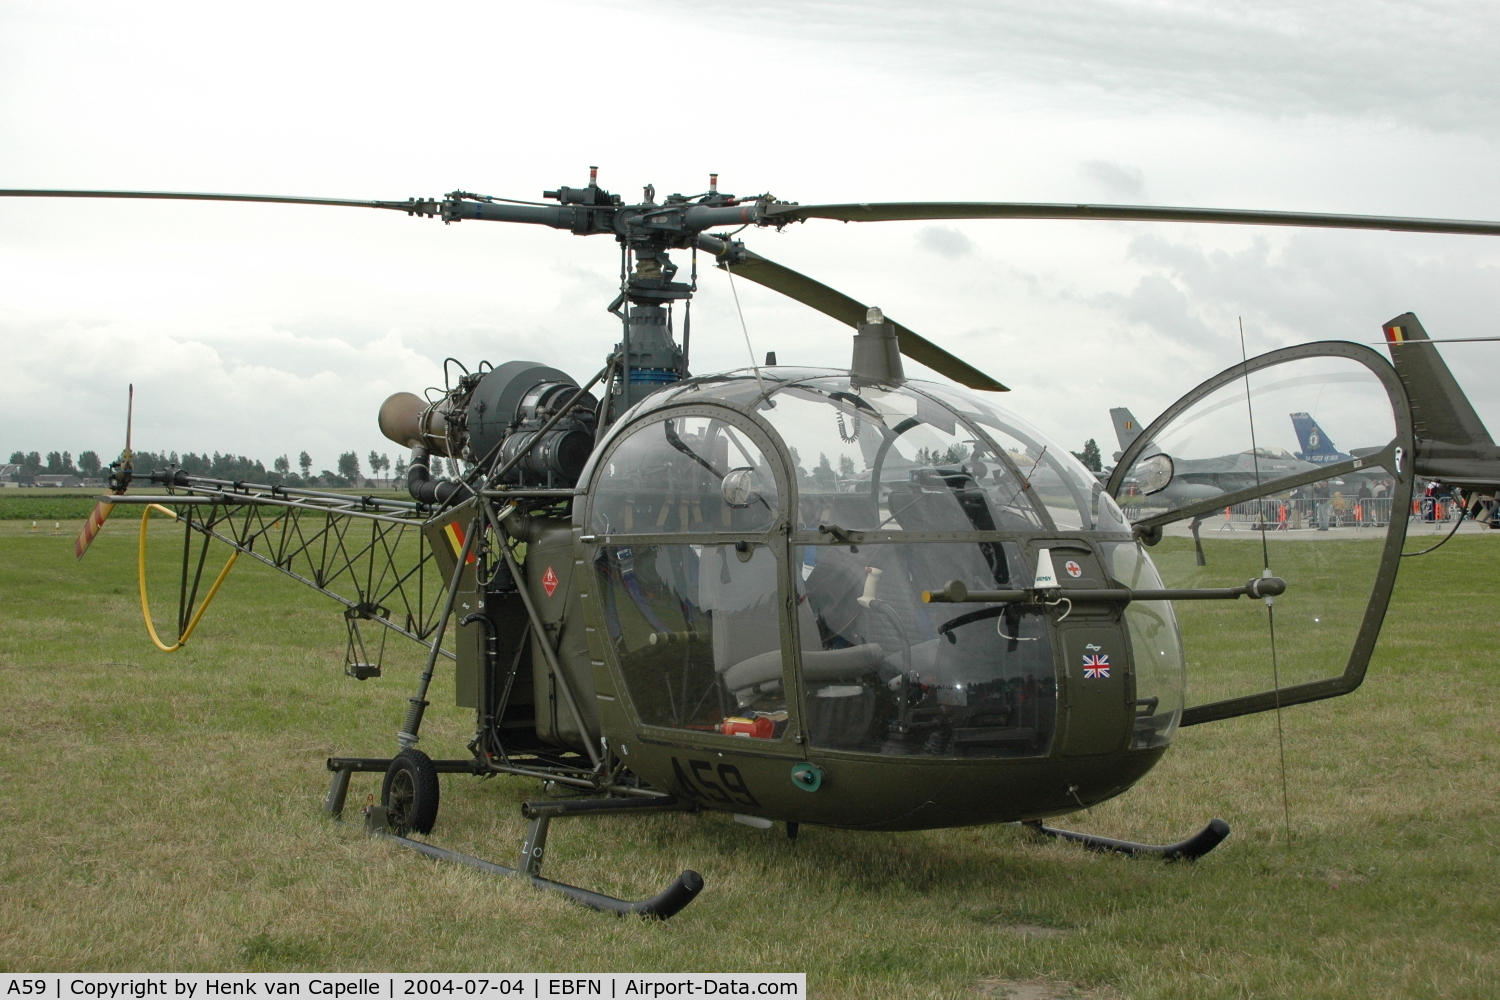 A59, Sud Aviation SA-318C Alouette II C/N 2018, Alouette II helicopter of the Light Aviation component of the Belgian Army at Koksijde Air Base, Belgium.